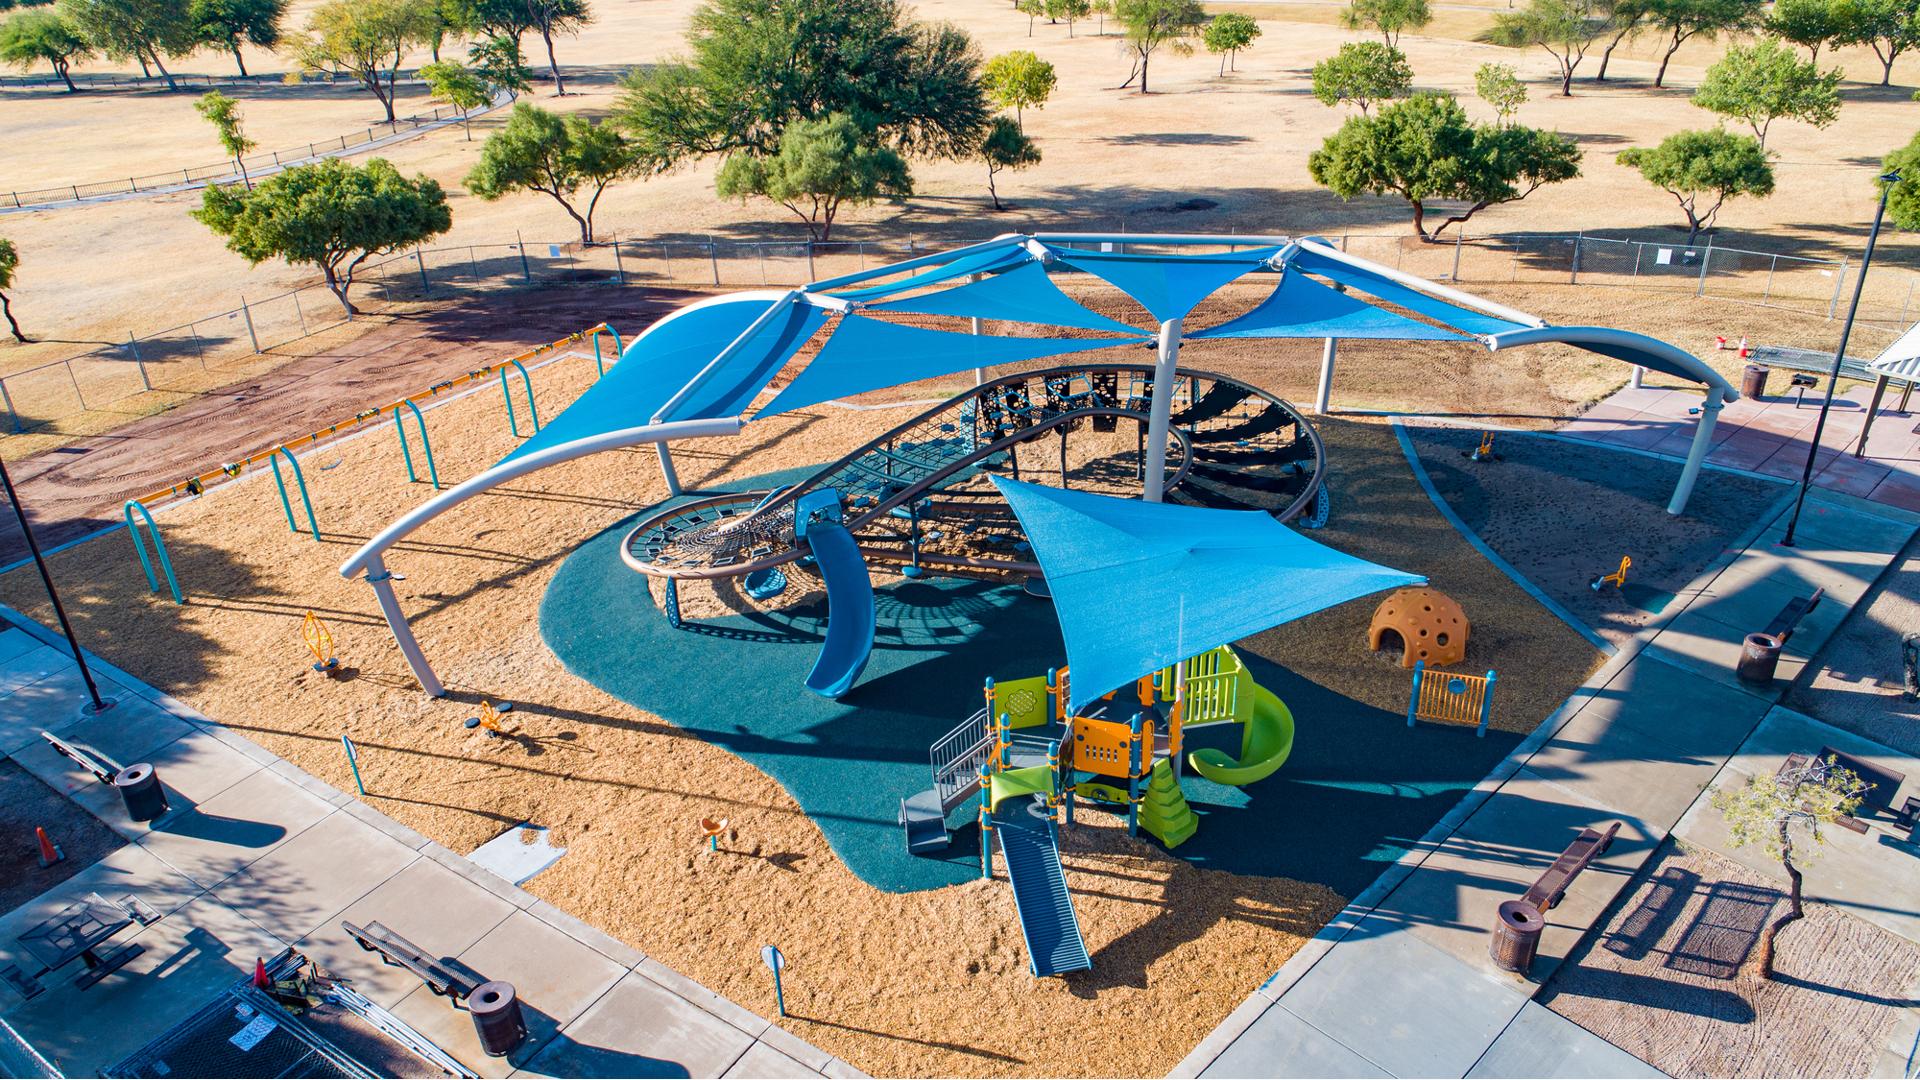 SkyWays shade products covering this elaborate playground featuring a new Qauntis play structure as well as a PlayBooster structure.